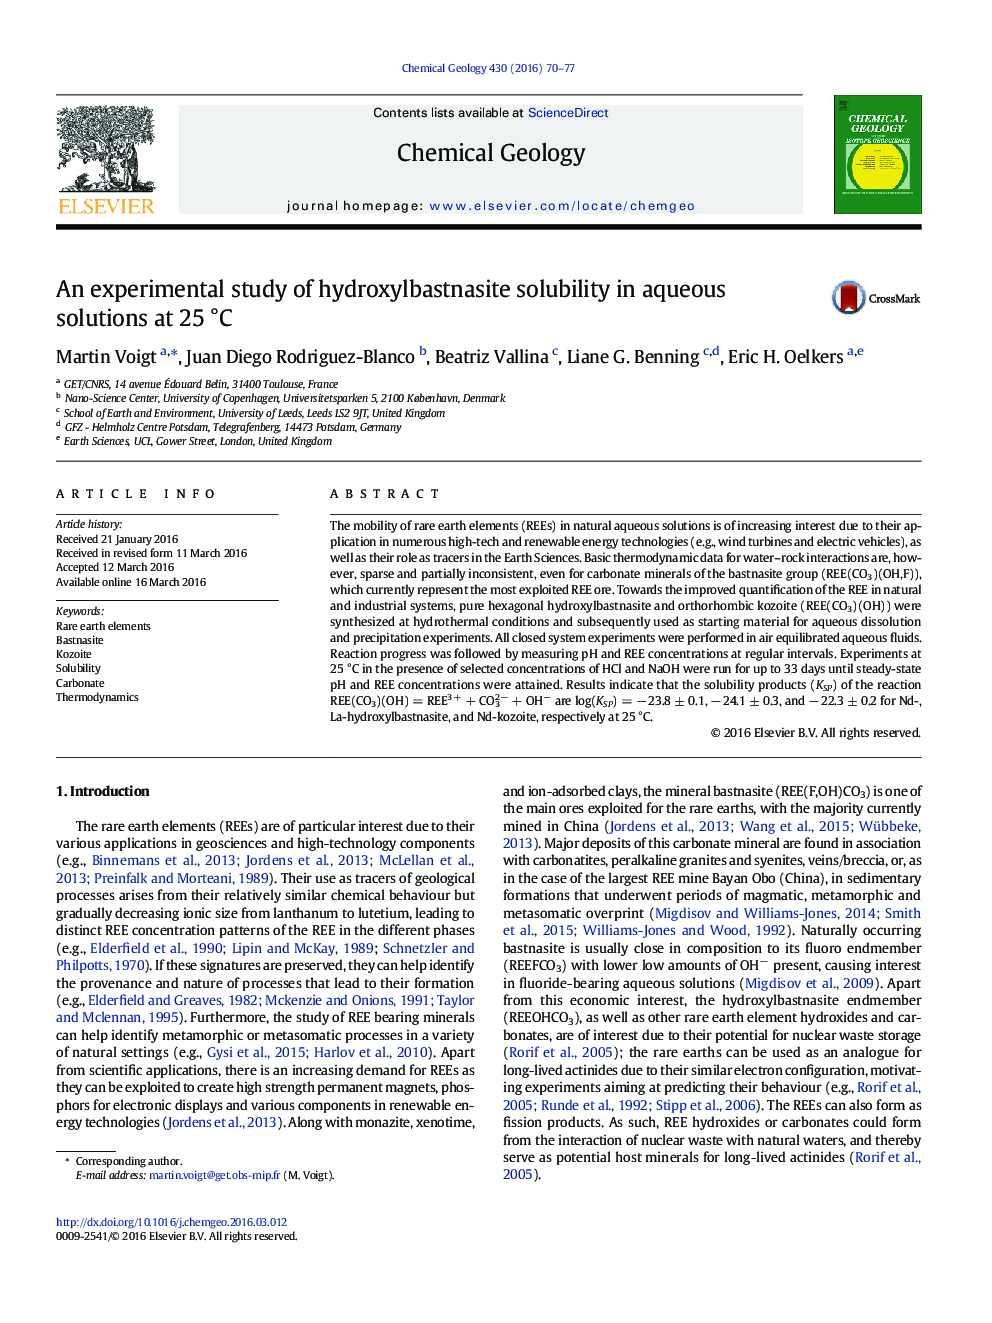 An experimental study of hydroxylbastnasite solubility in aqueous solutions at 25 °C